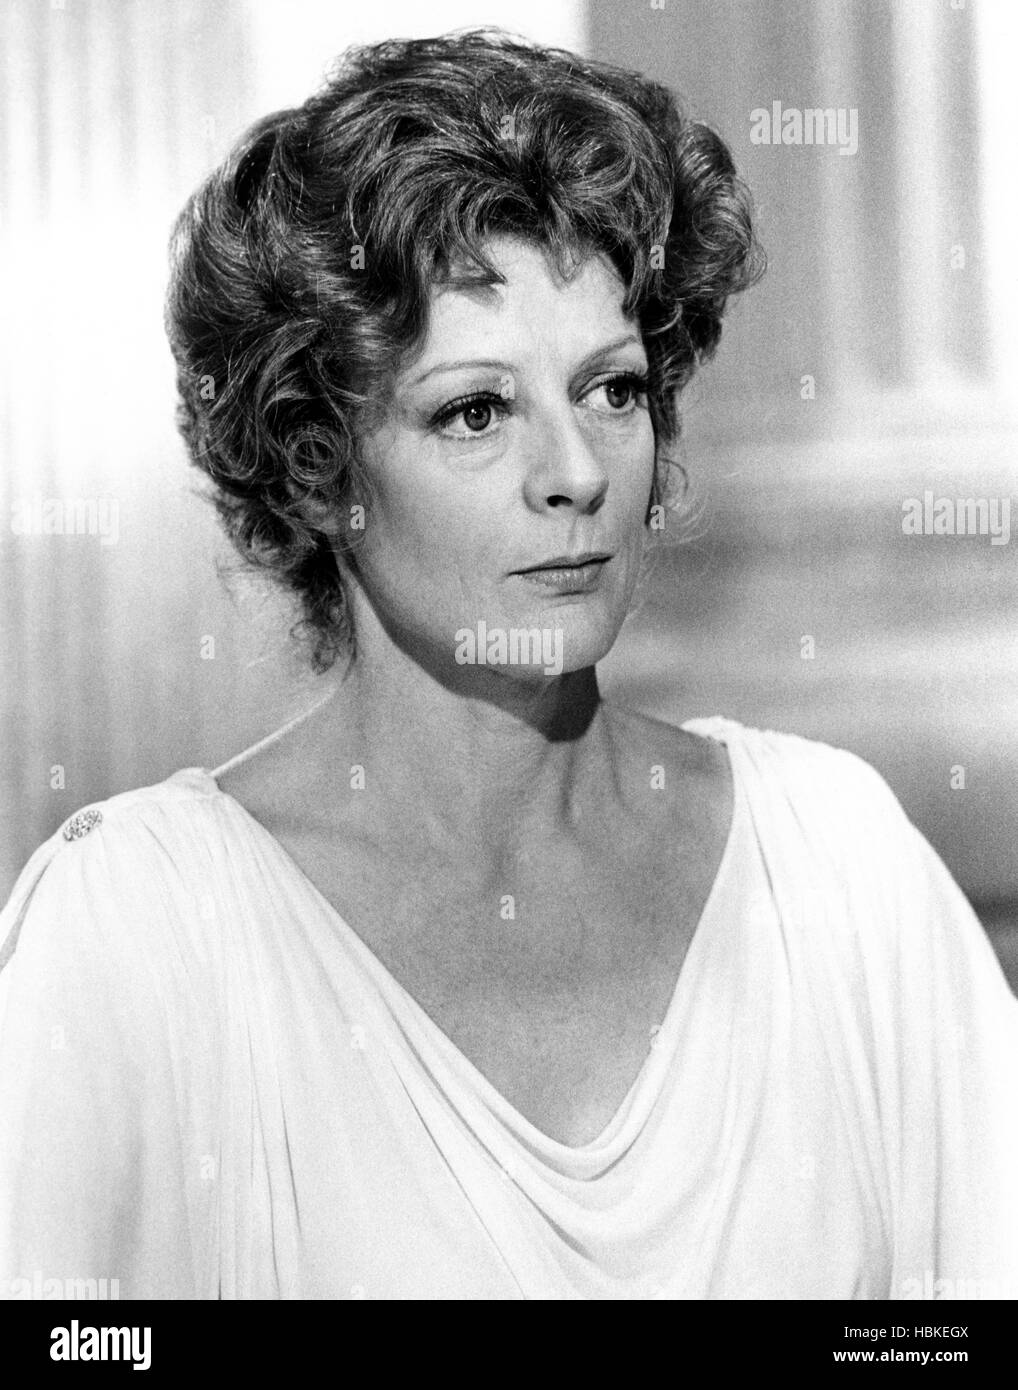 CLASH OF THE TITANS, Maggie Smith, 1981, (c) MGM, courtesy Everett Collection Stock Photo